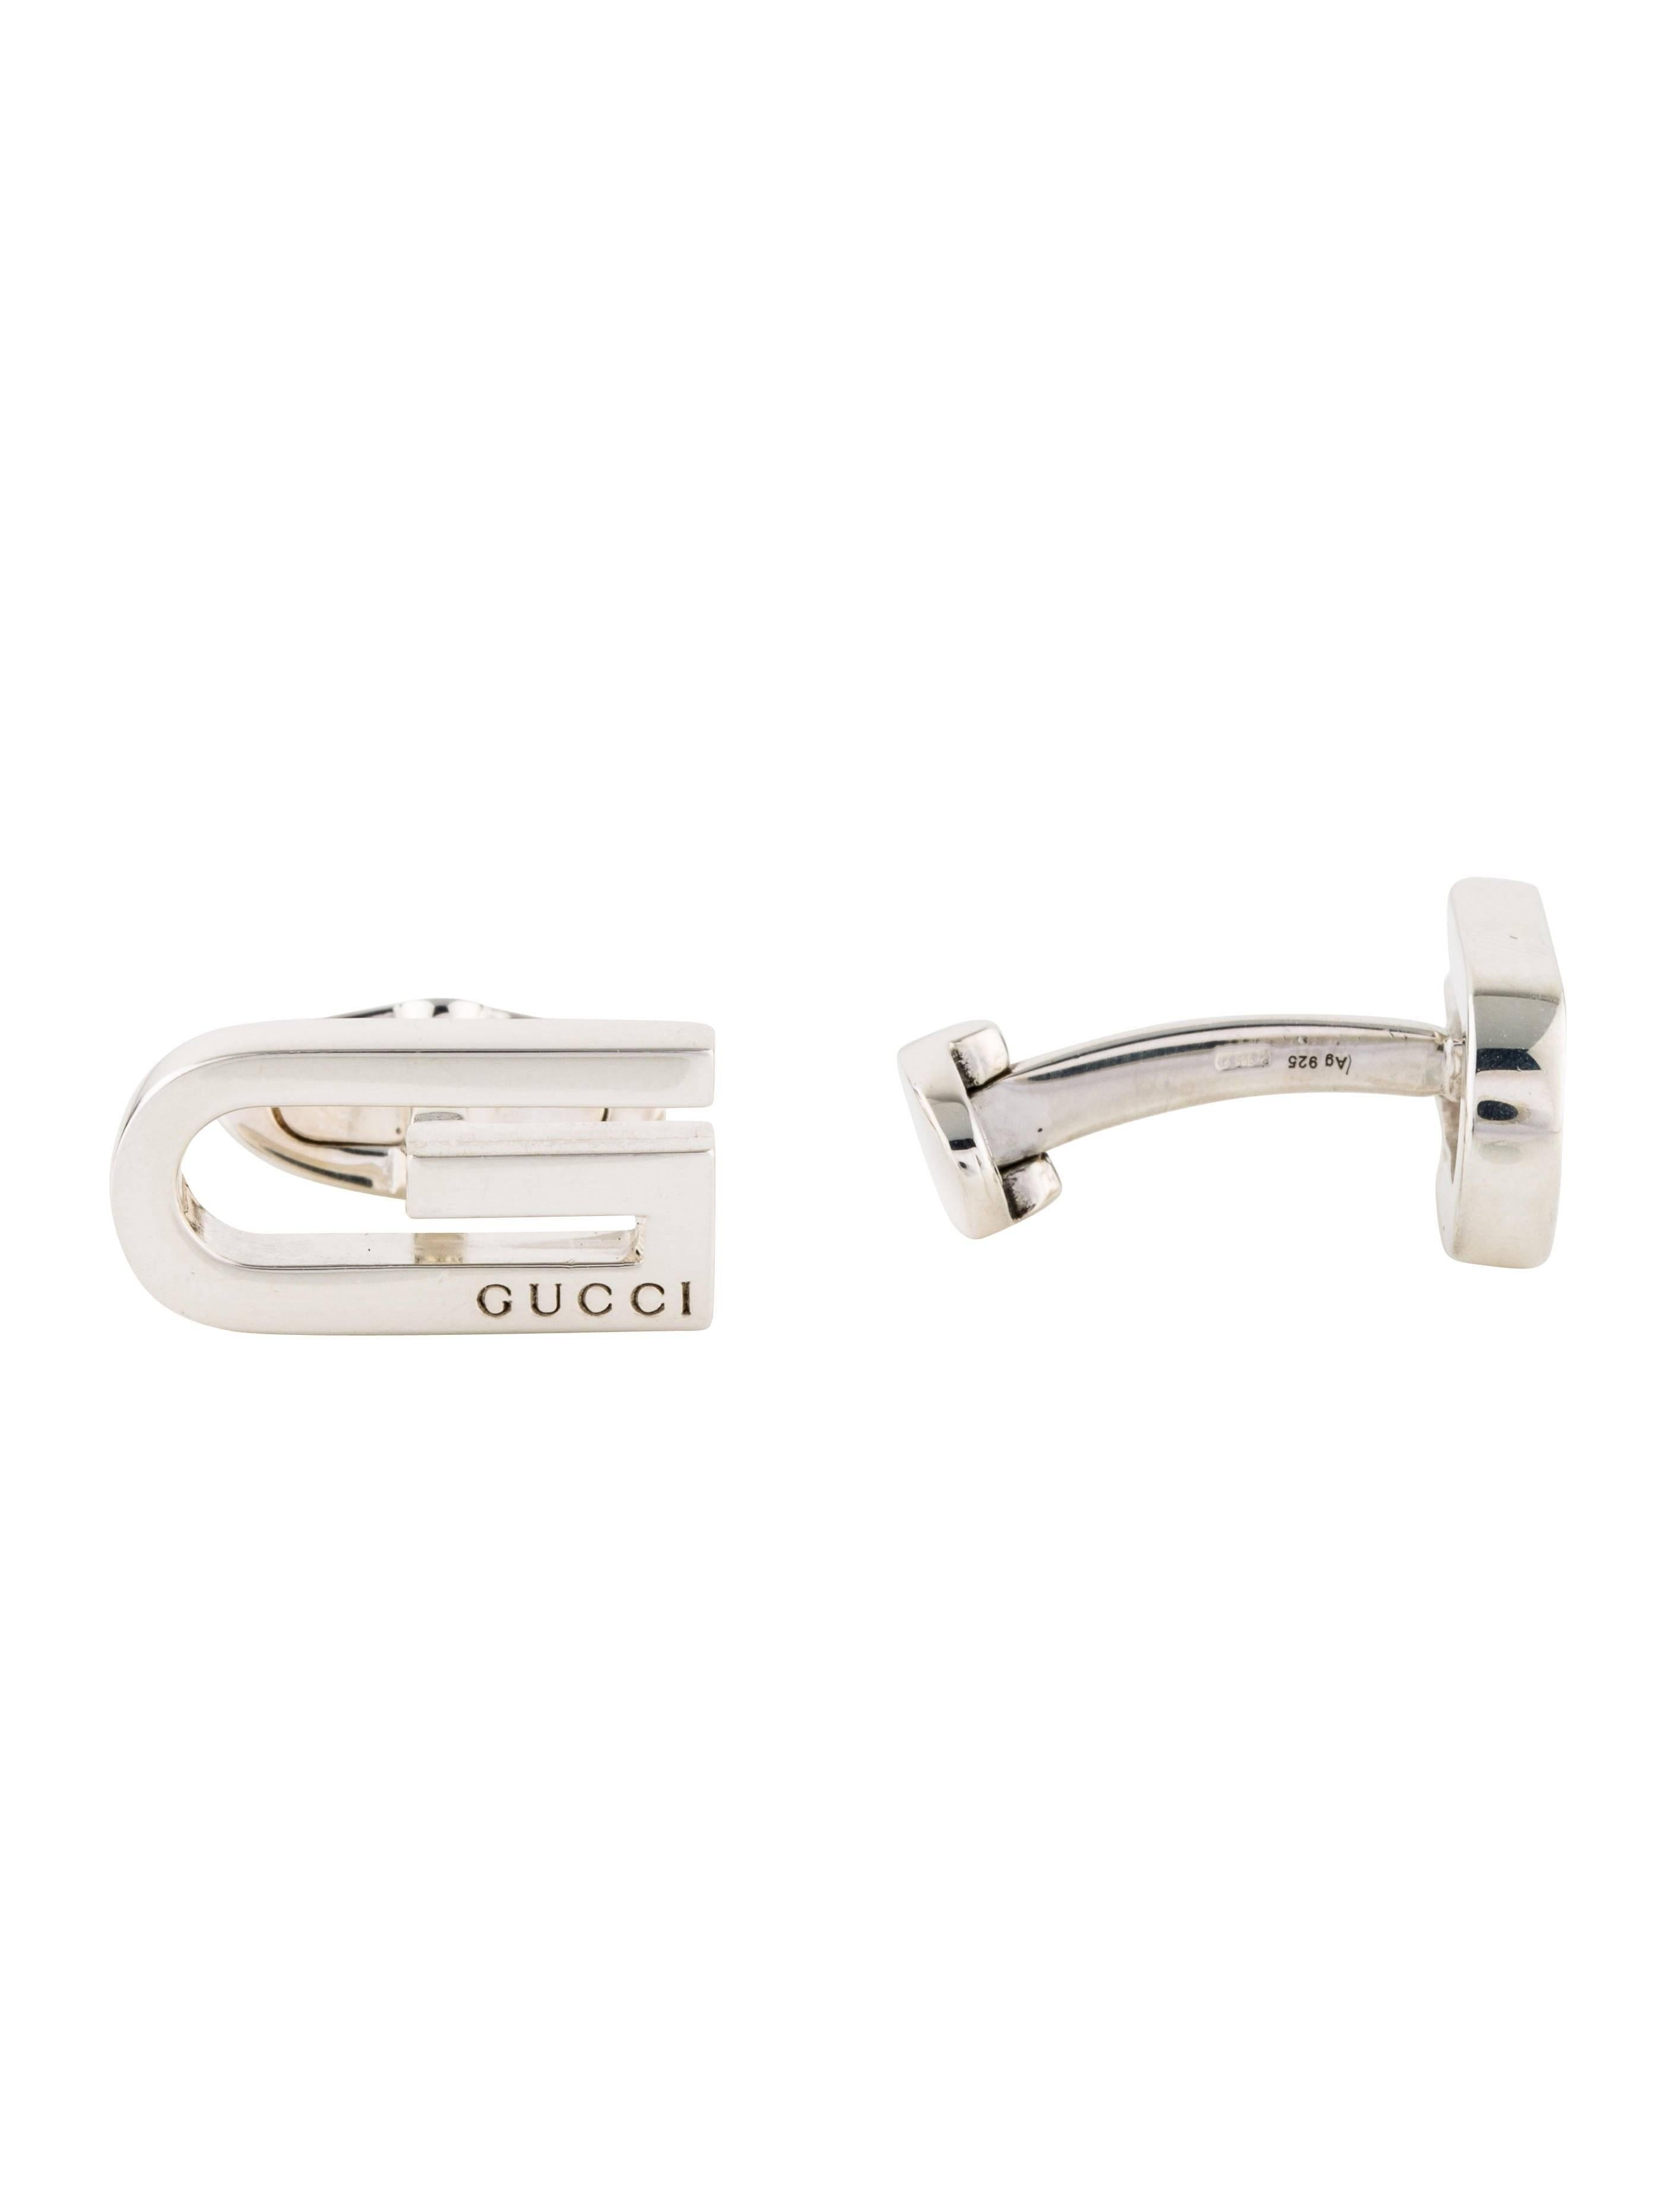 Gucci New Sterling Silver Square Men's Evening Suit Accessory Cuff Links in Box

Genuine sterling silver - 925 
Whale back closure
Signed 
Made in Italy
Measures 0.70" W x 0.40" L
Includes original Gucci authentic card, storage pouch and